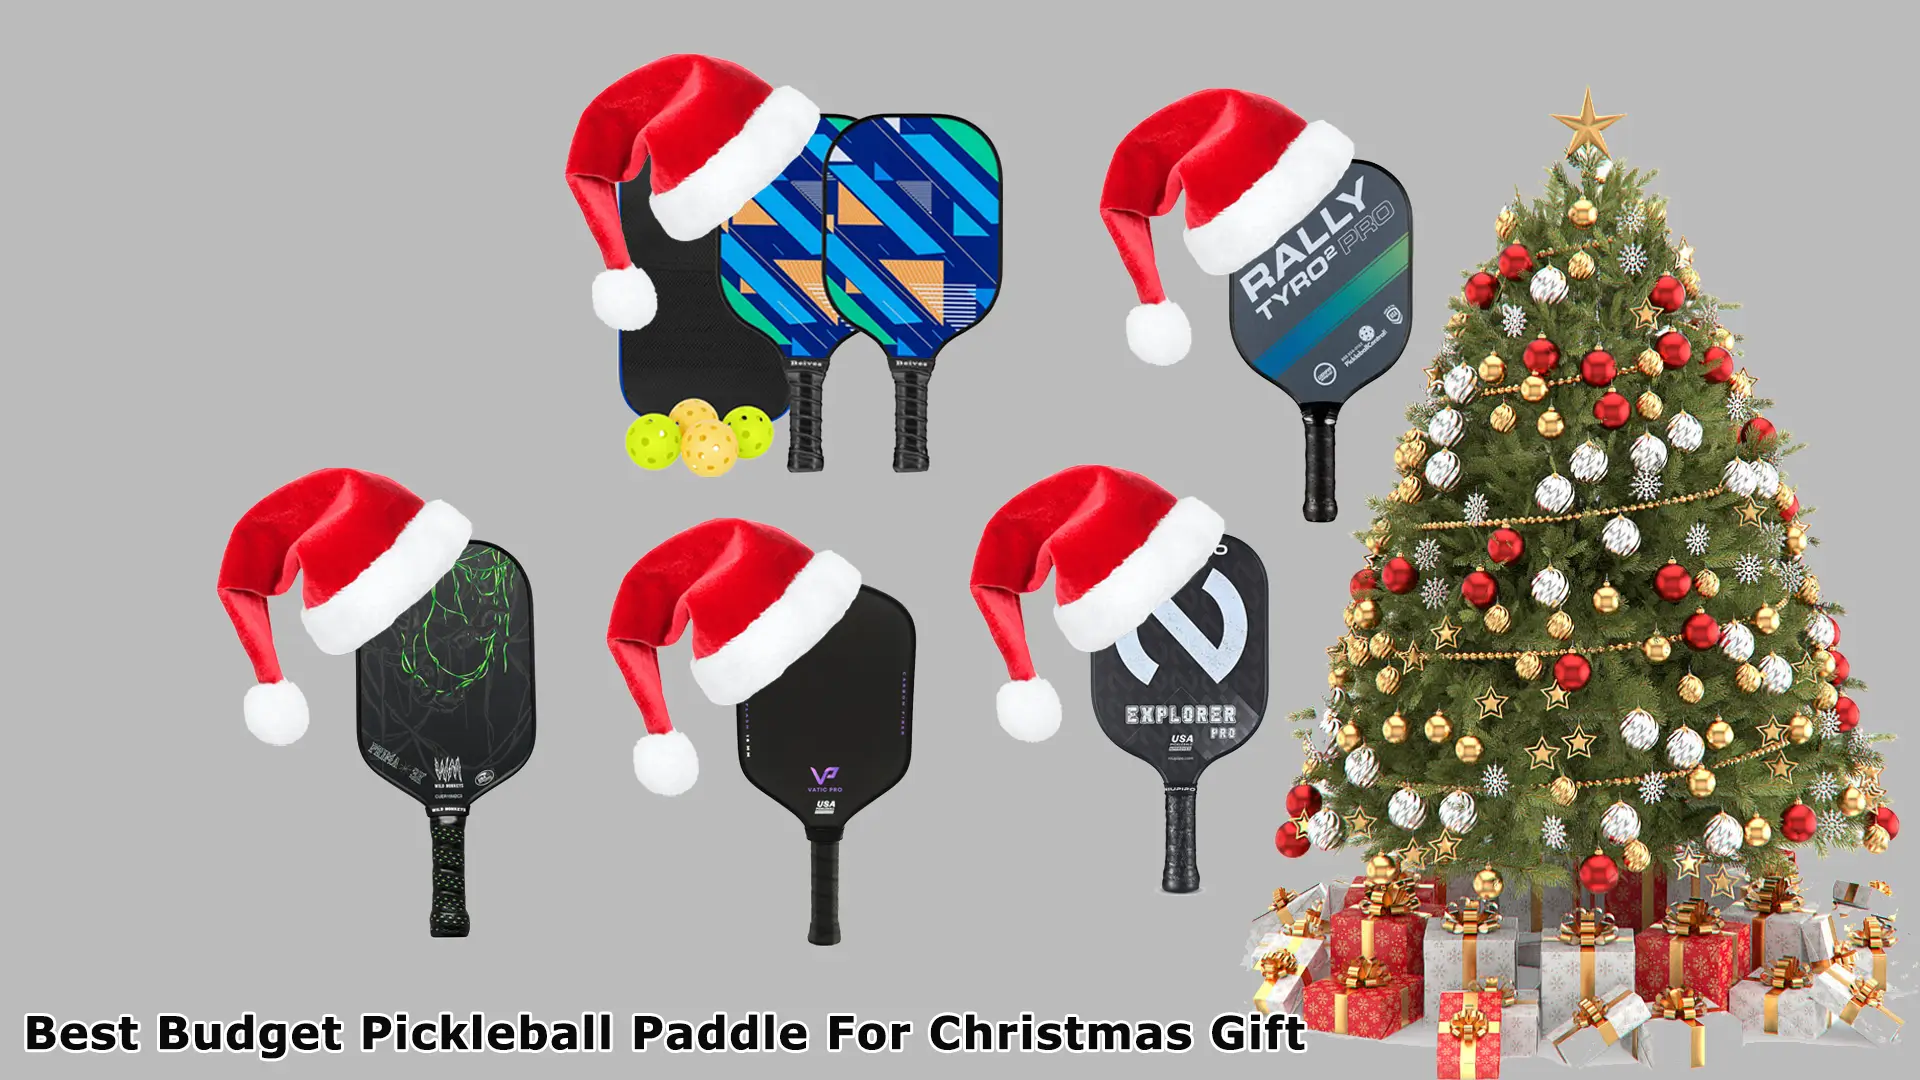 Best Budget Pickleball Paddle For Christmas Gift